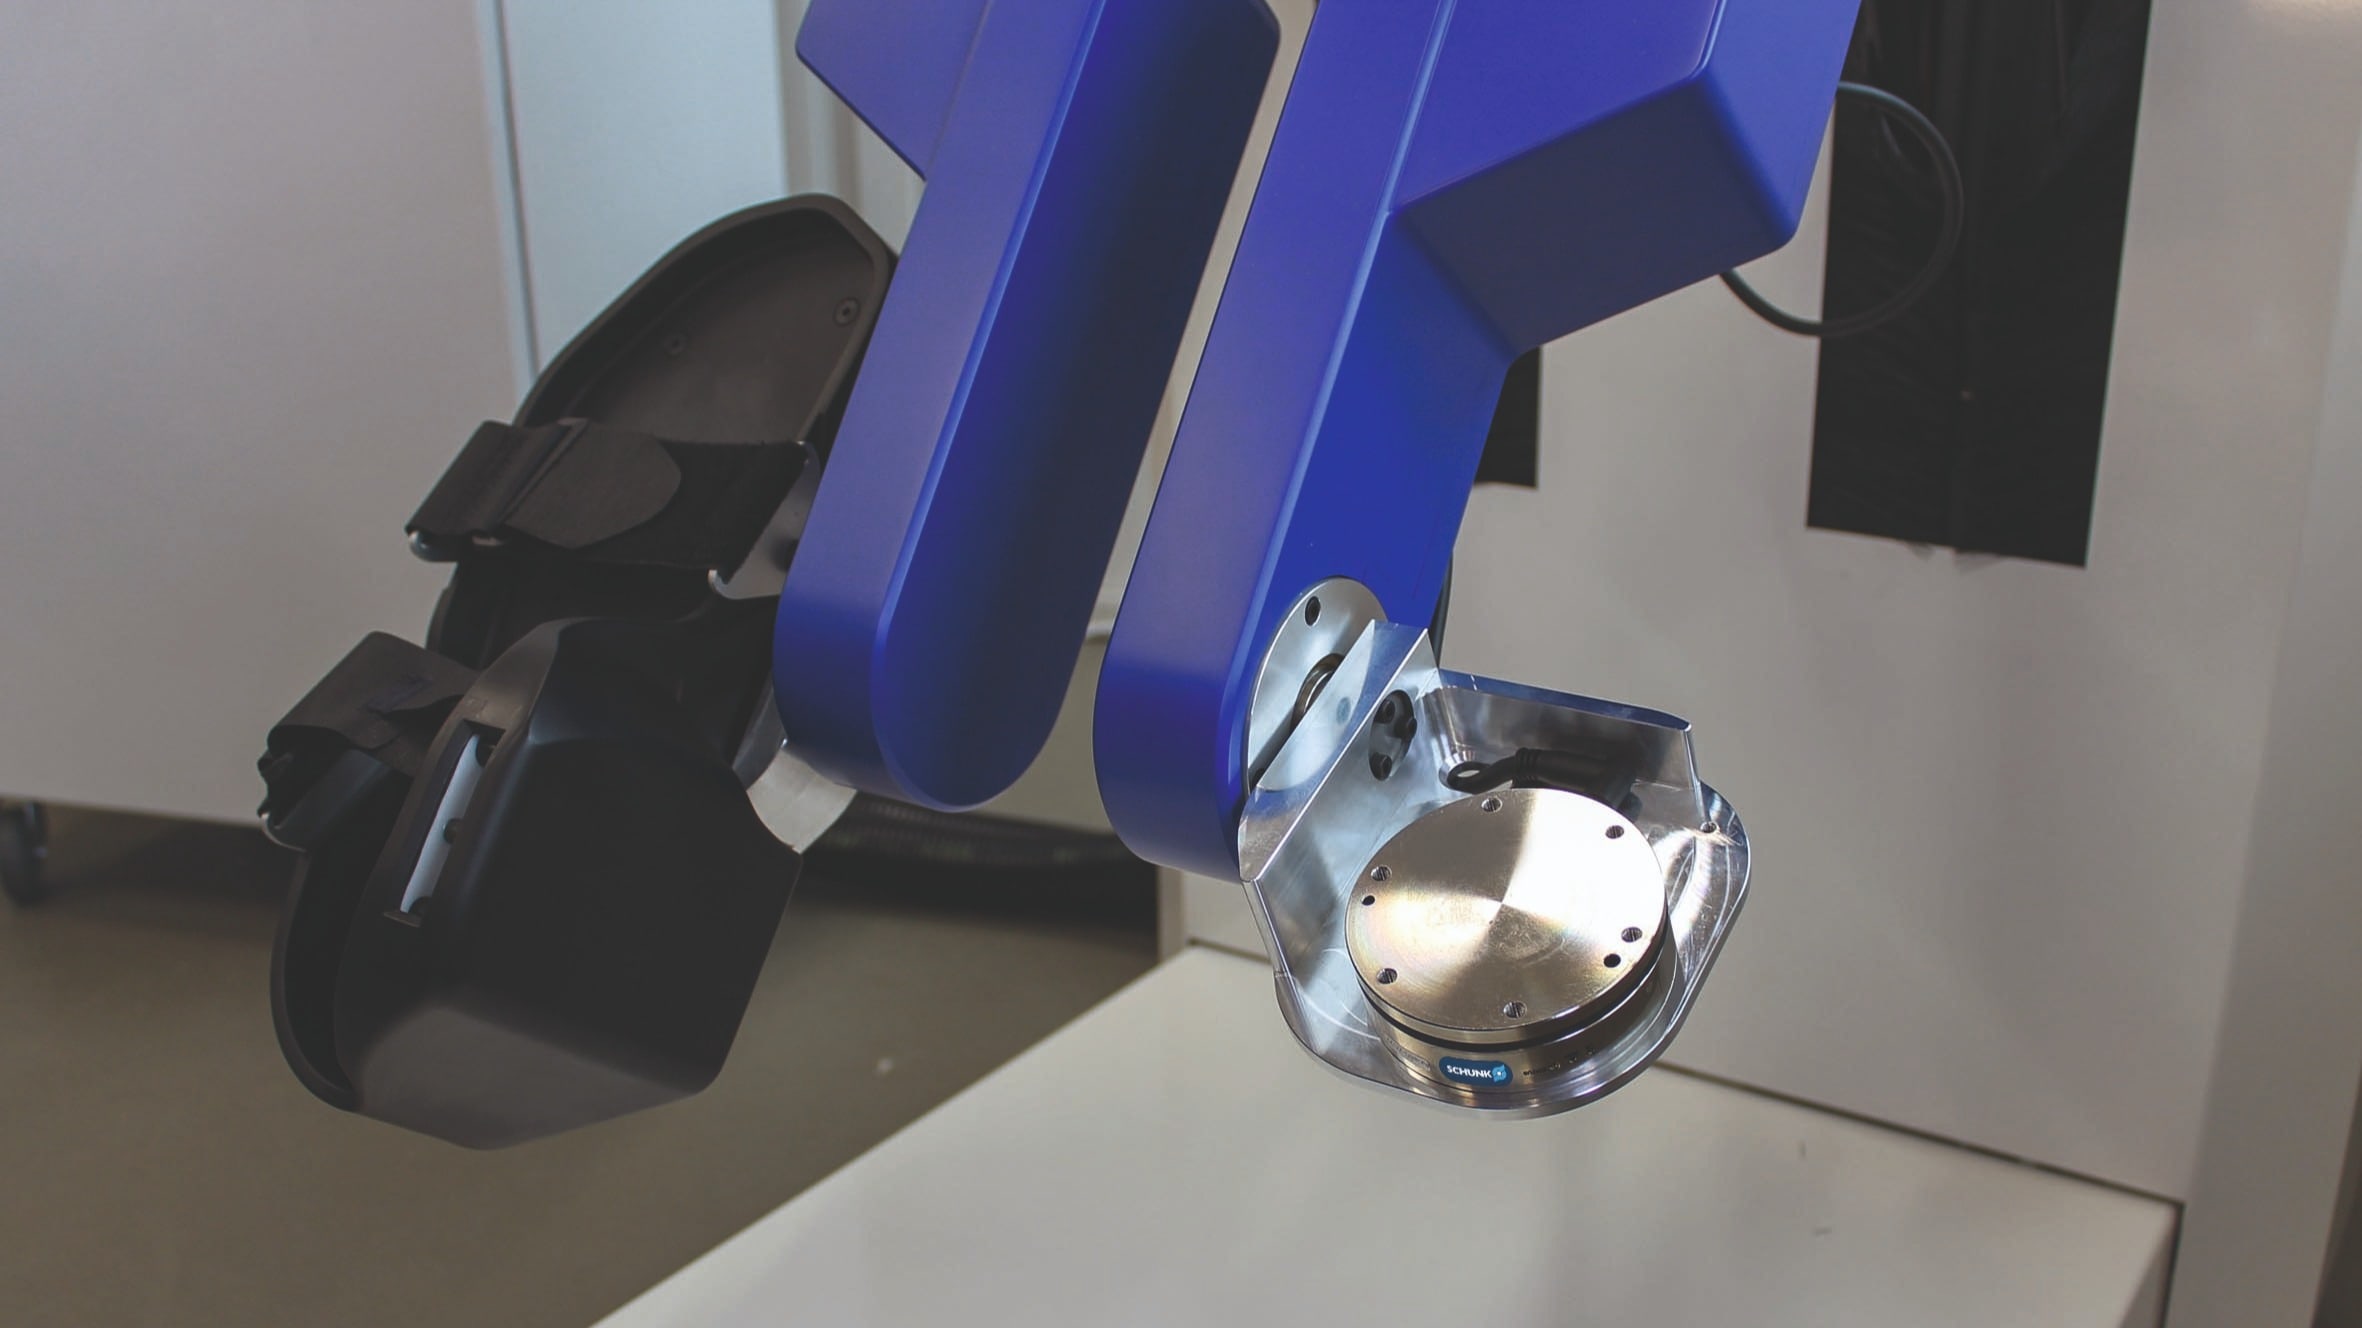 The SCHUNK FTN-AXIA80 are integrated in the foot pedals of the robot for this application